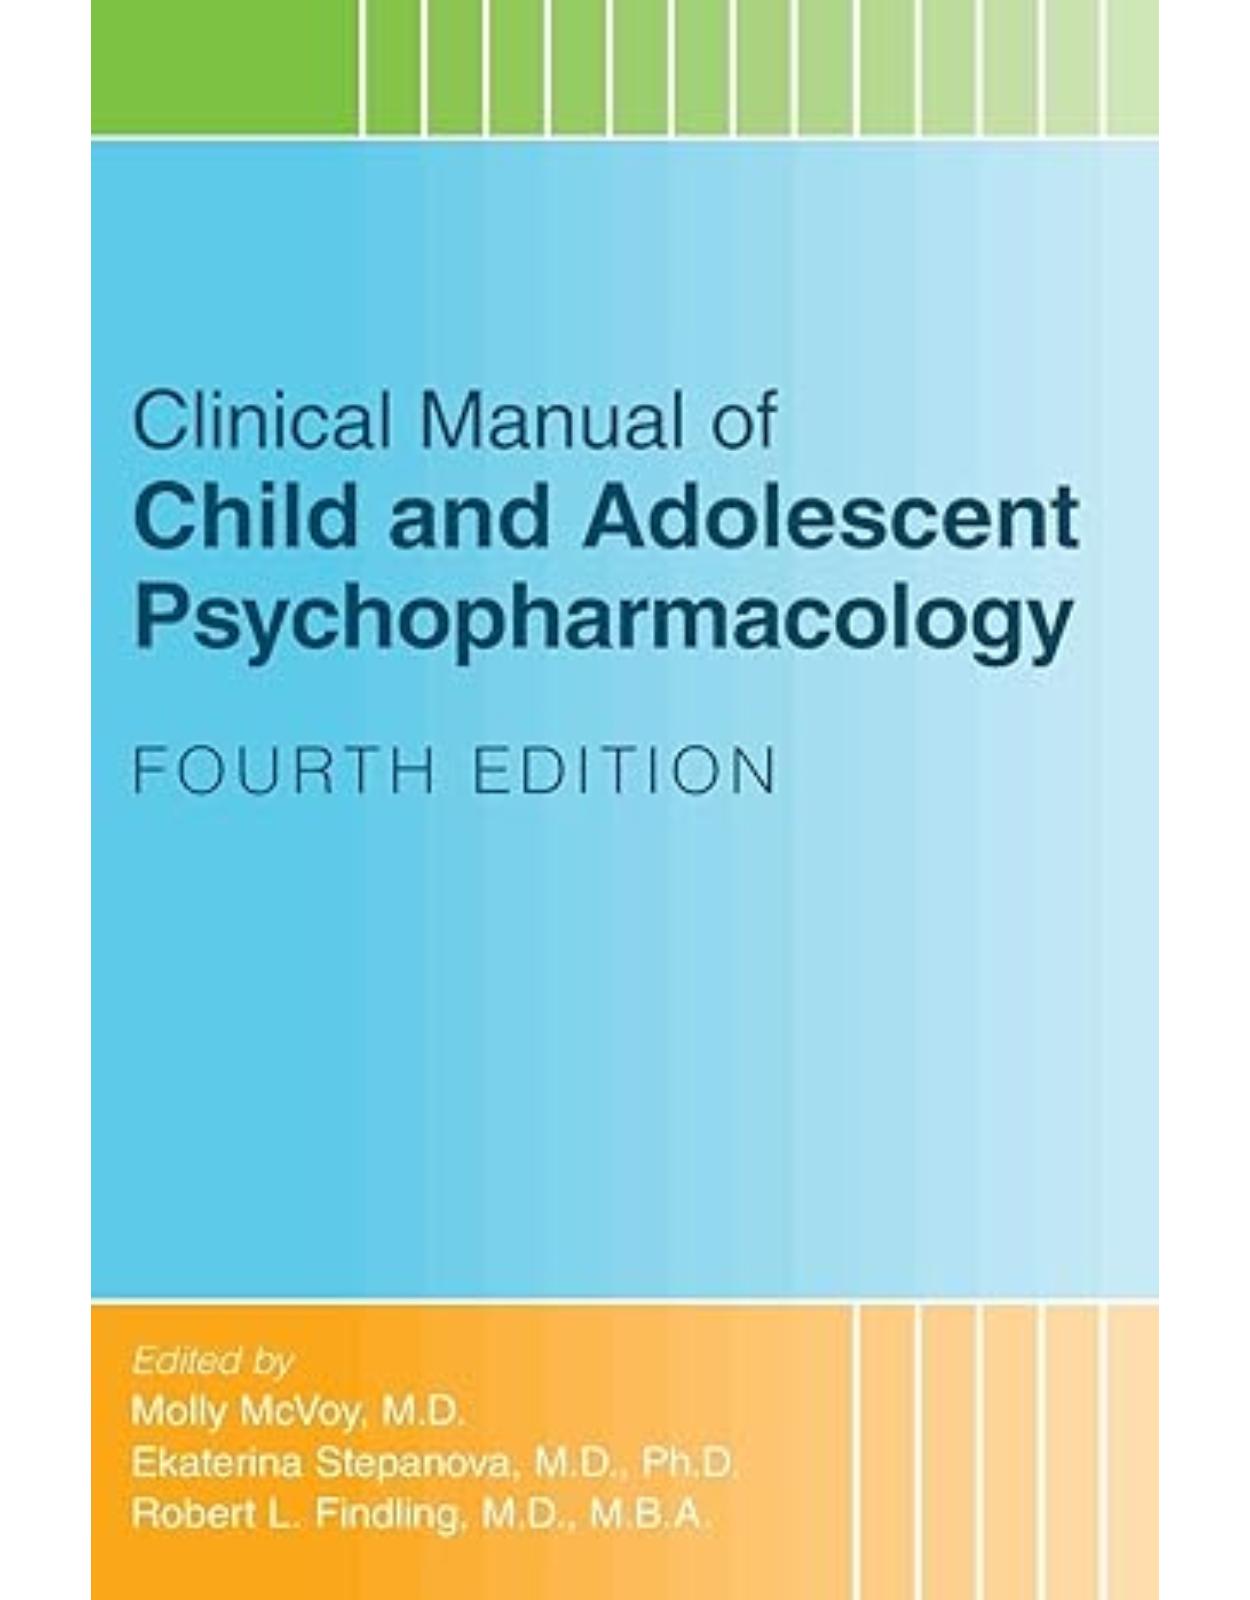 Clinical Manual of Child and Adolescent Psychopharmacology 